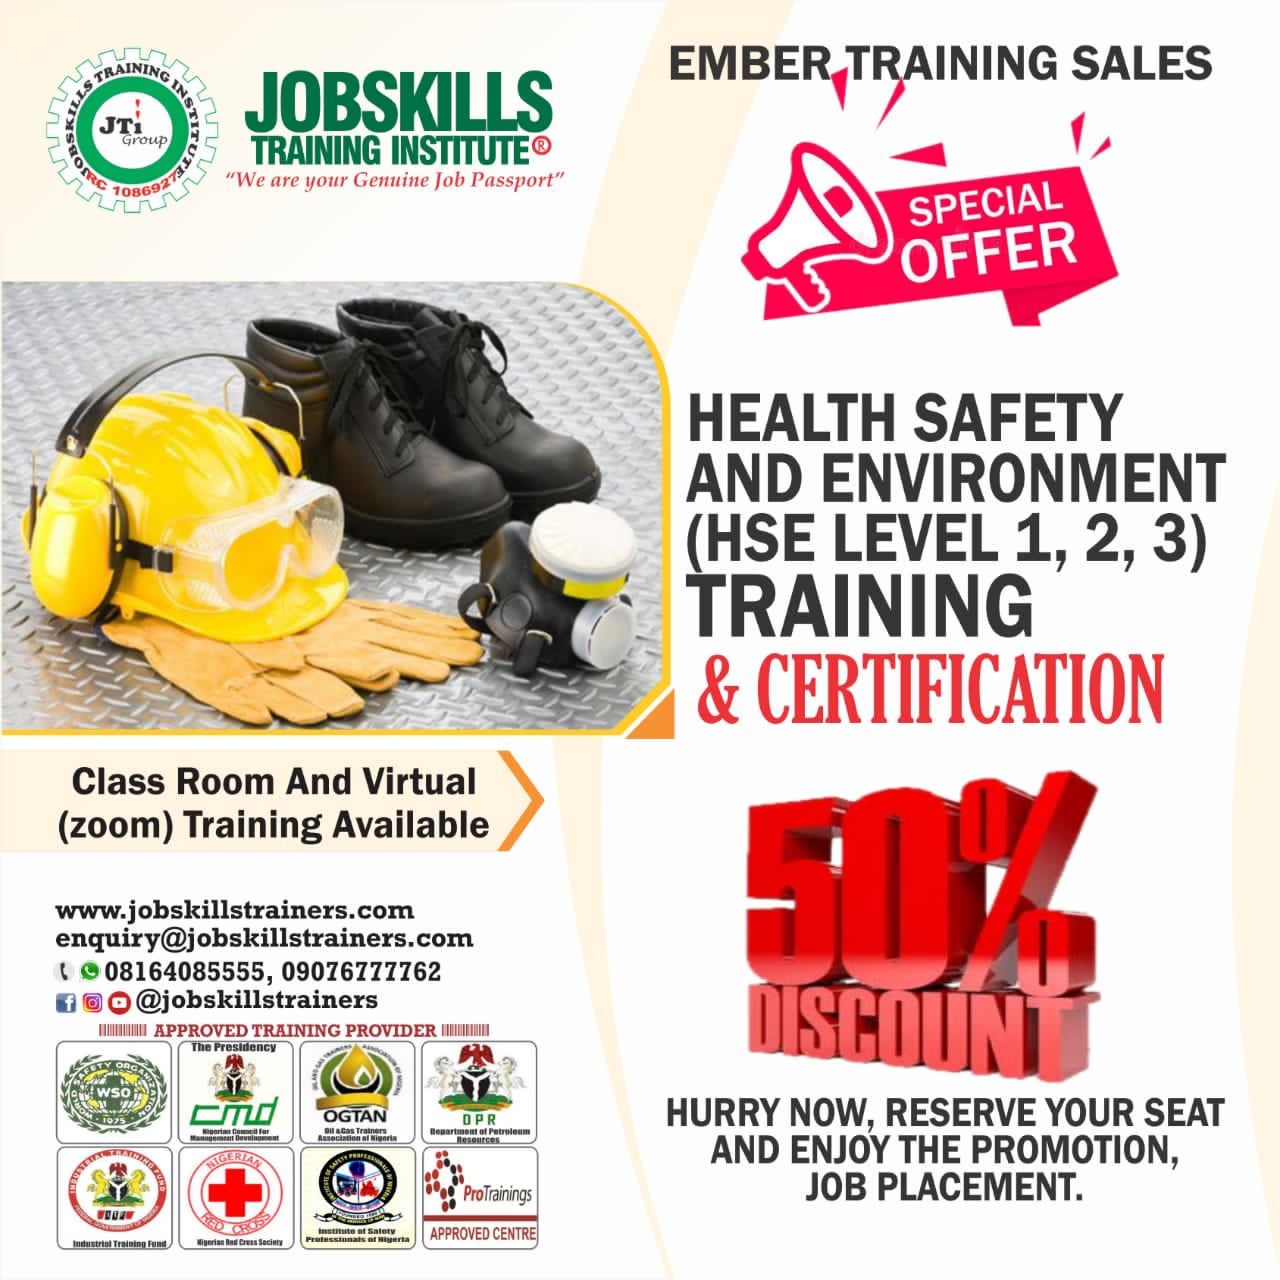 HEALTH, SAFETY & ENVIRONMENT TRAINING (LEVEL 1,2,3